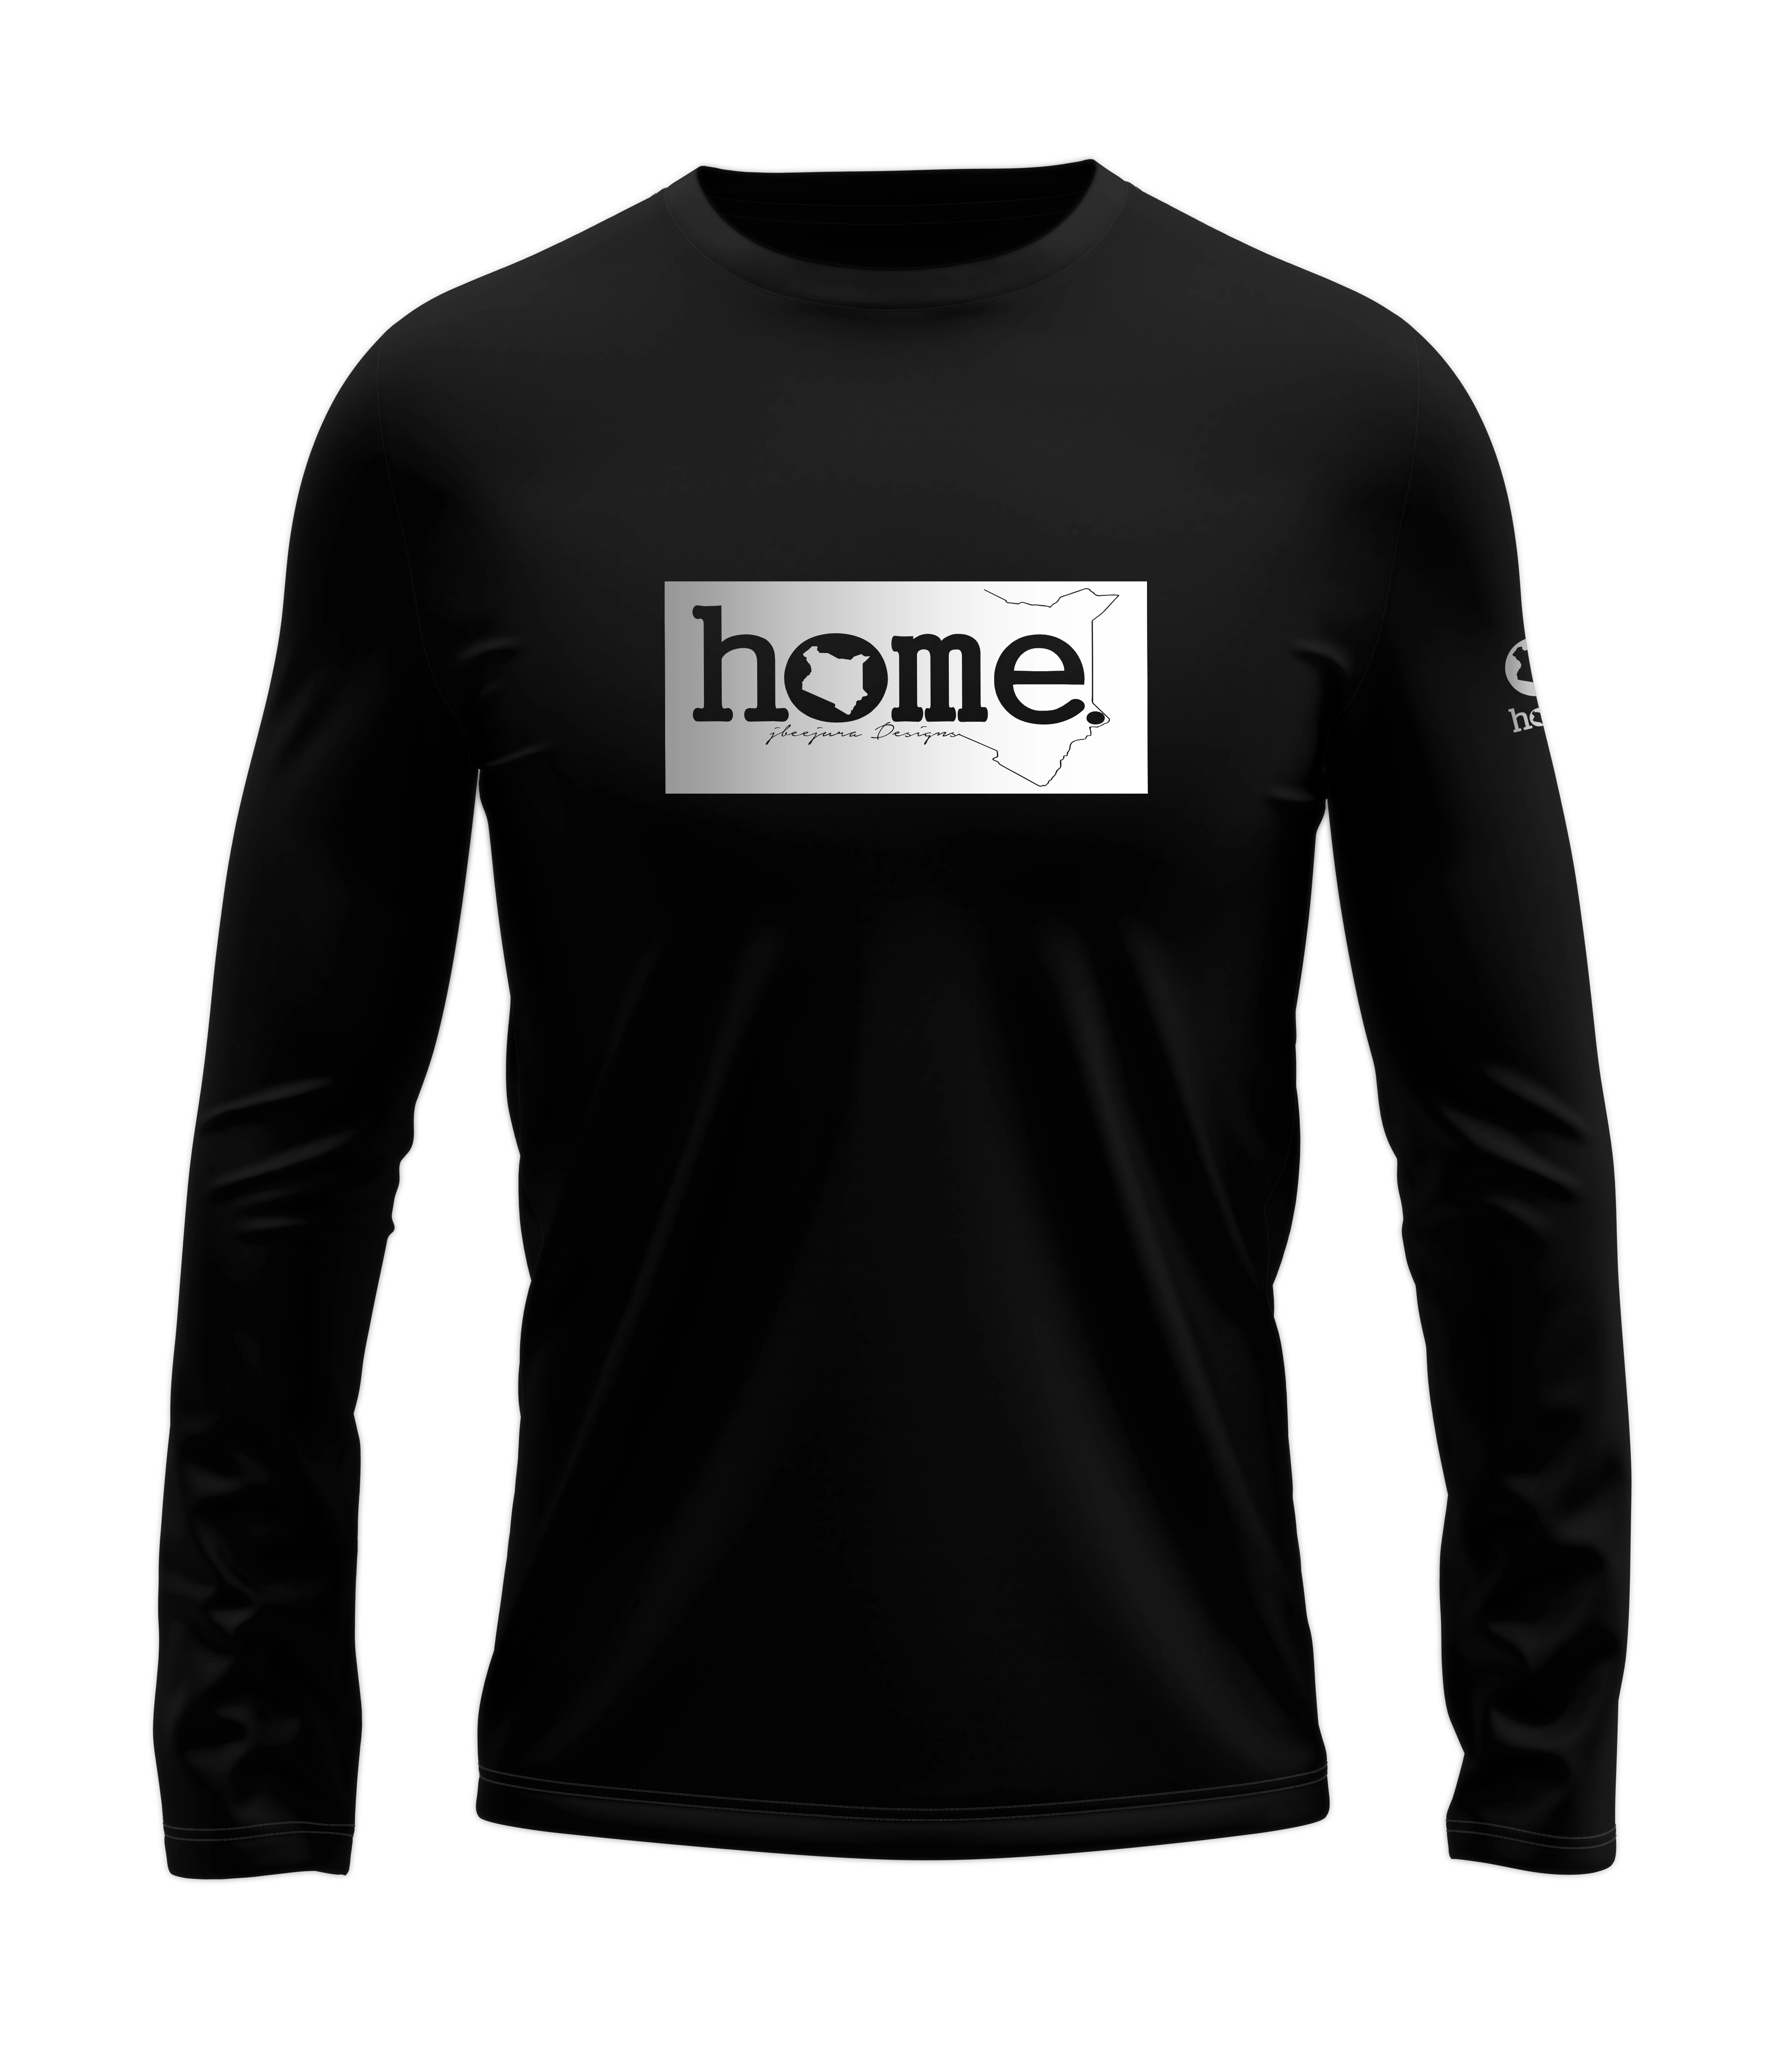 home_254 LONG-SLEEVED BLACK T-SHIRT WITH A SILVER CLASSIC PRINT – COTTON PLUS FABRIC